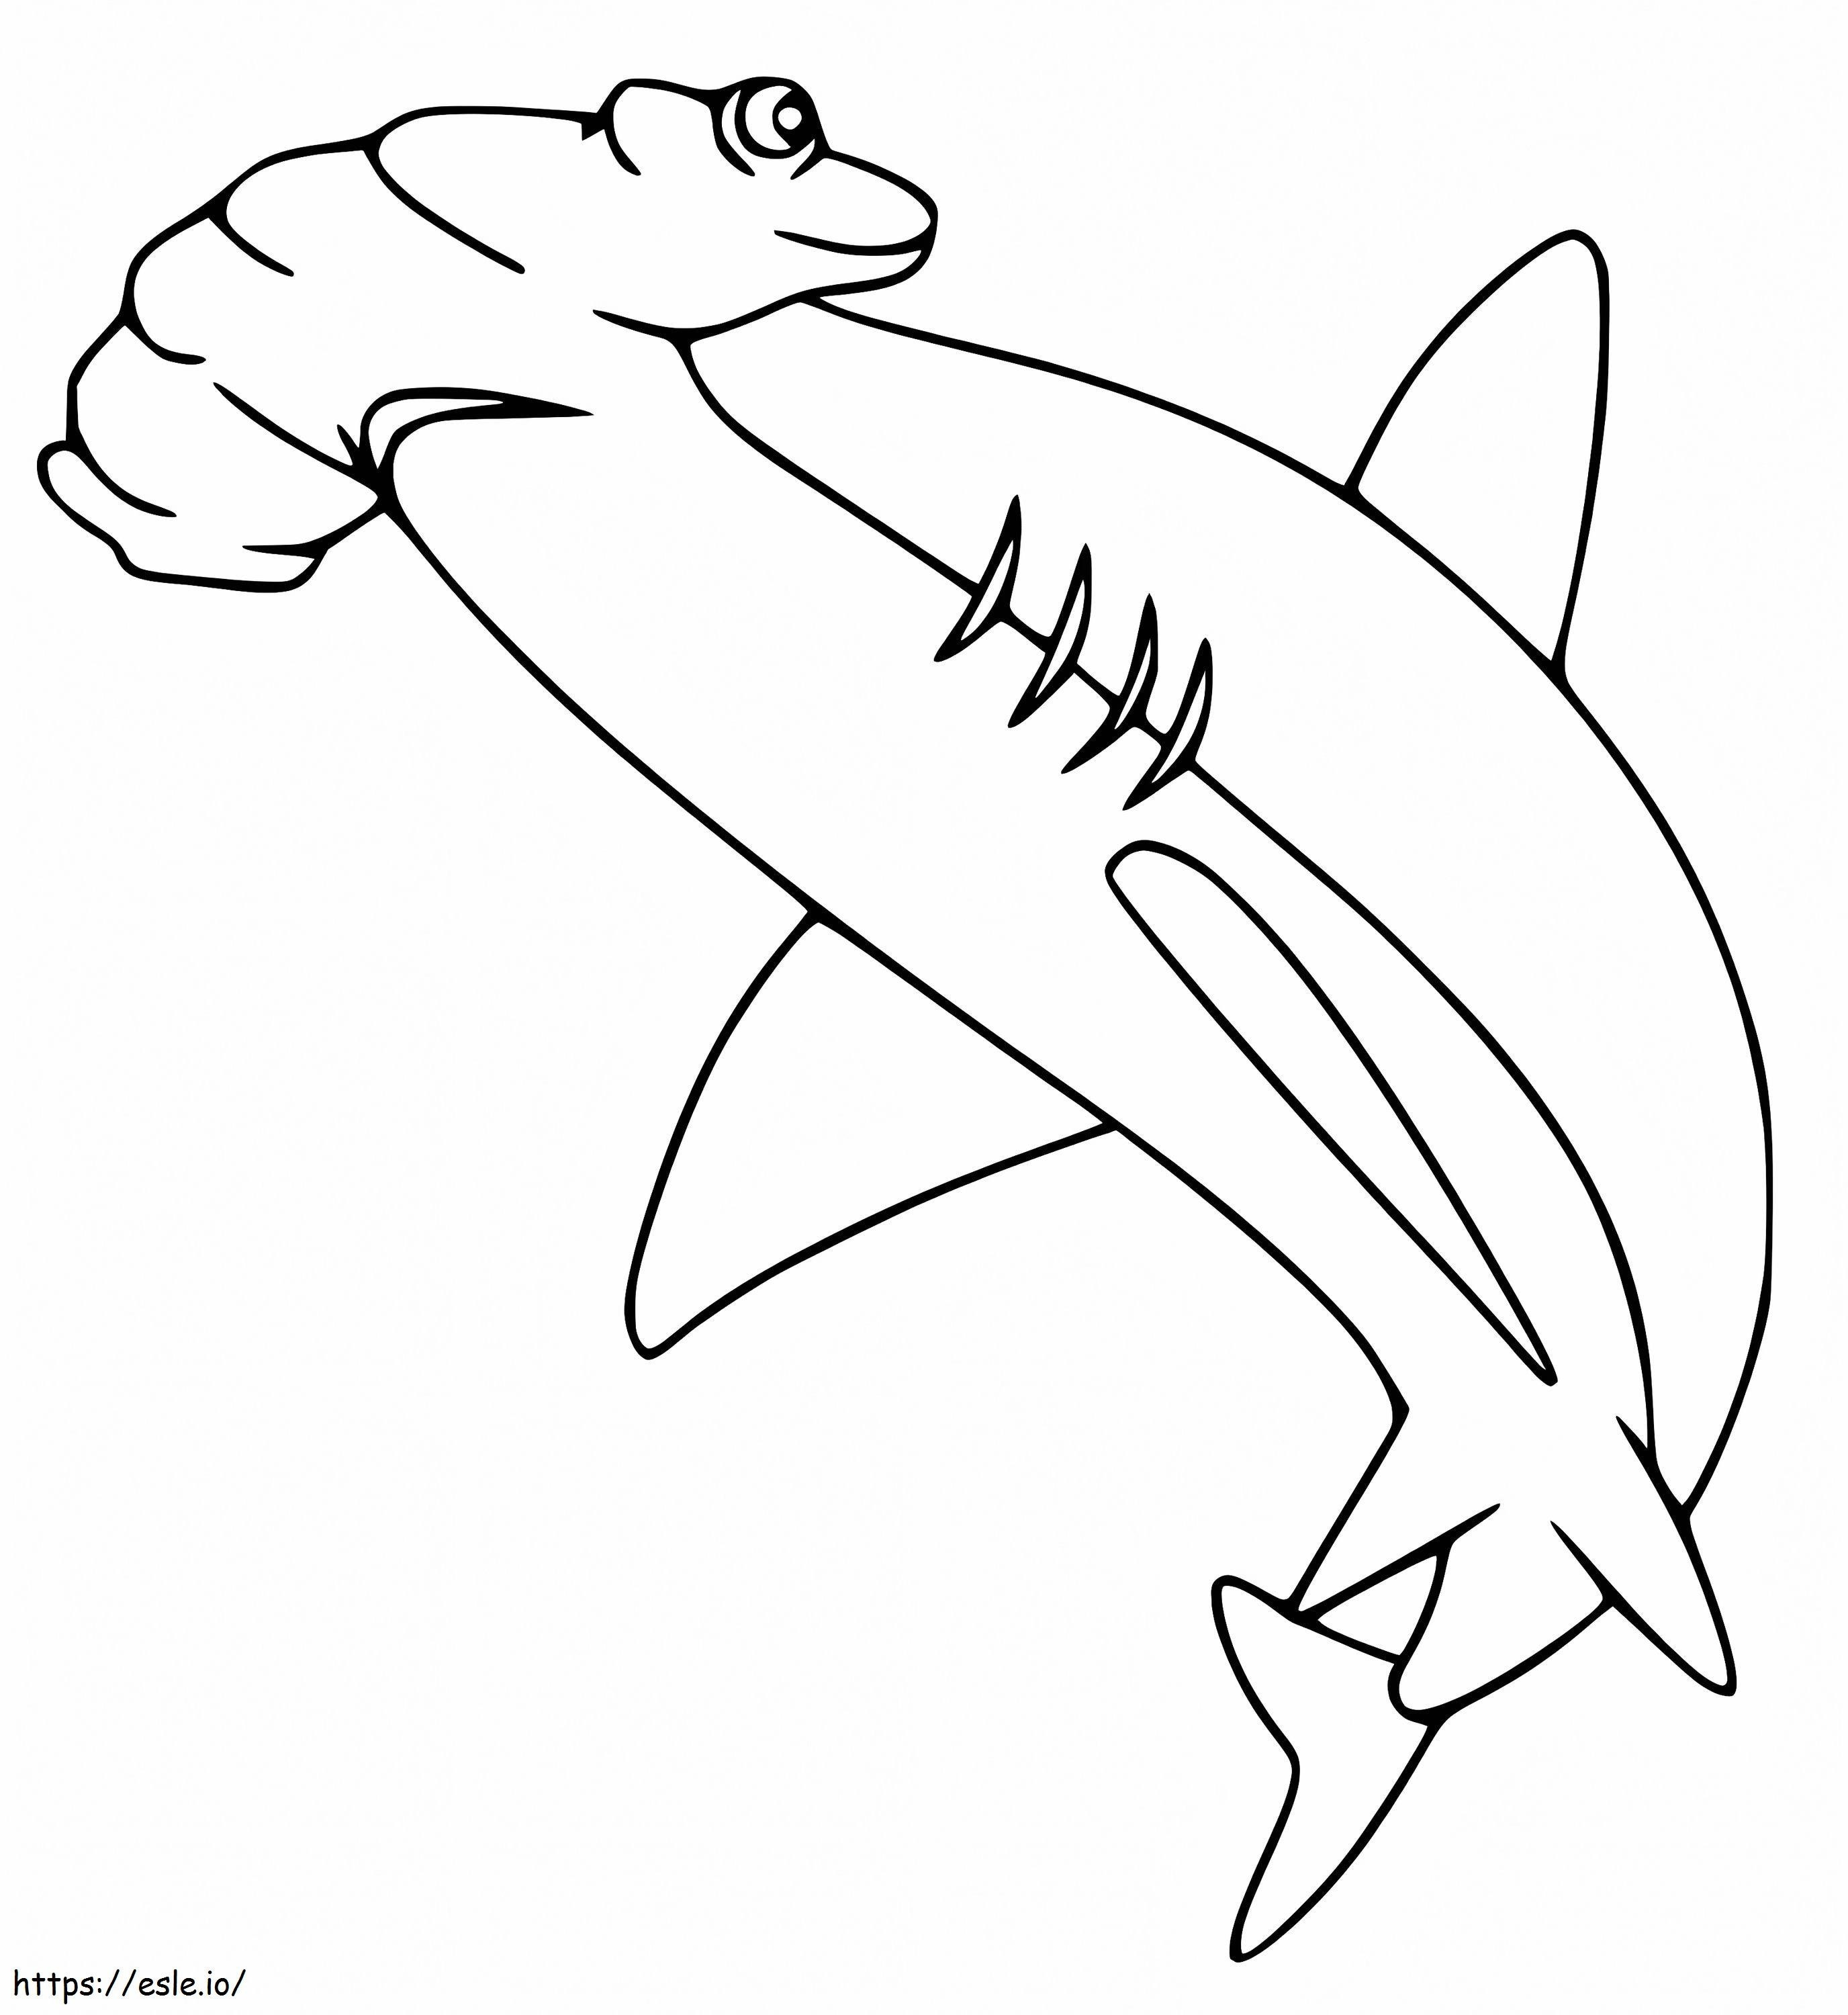 Hammerhead Shark 5 coloring page